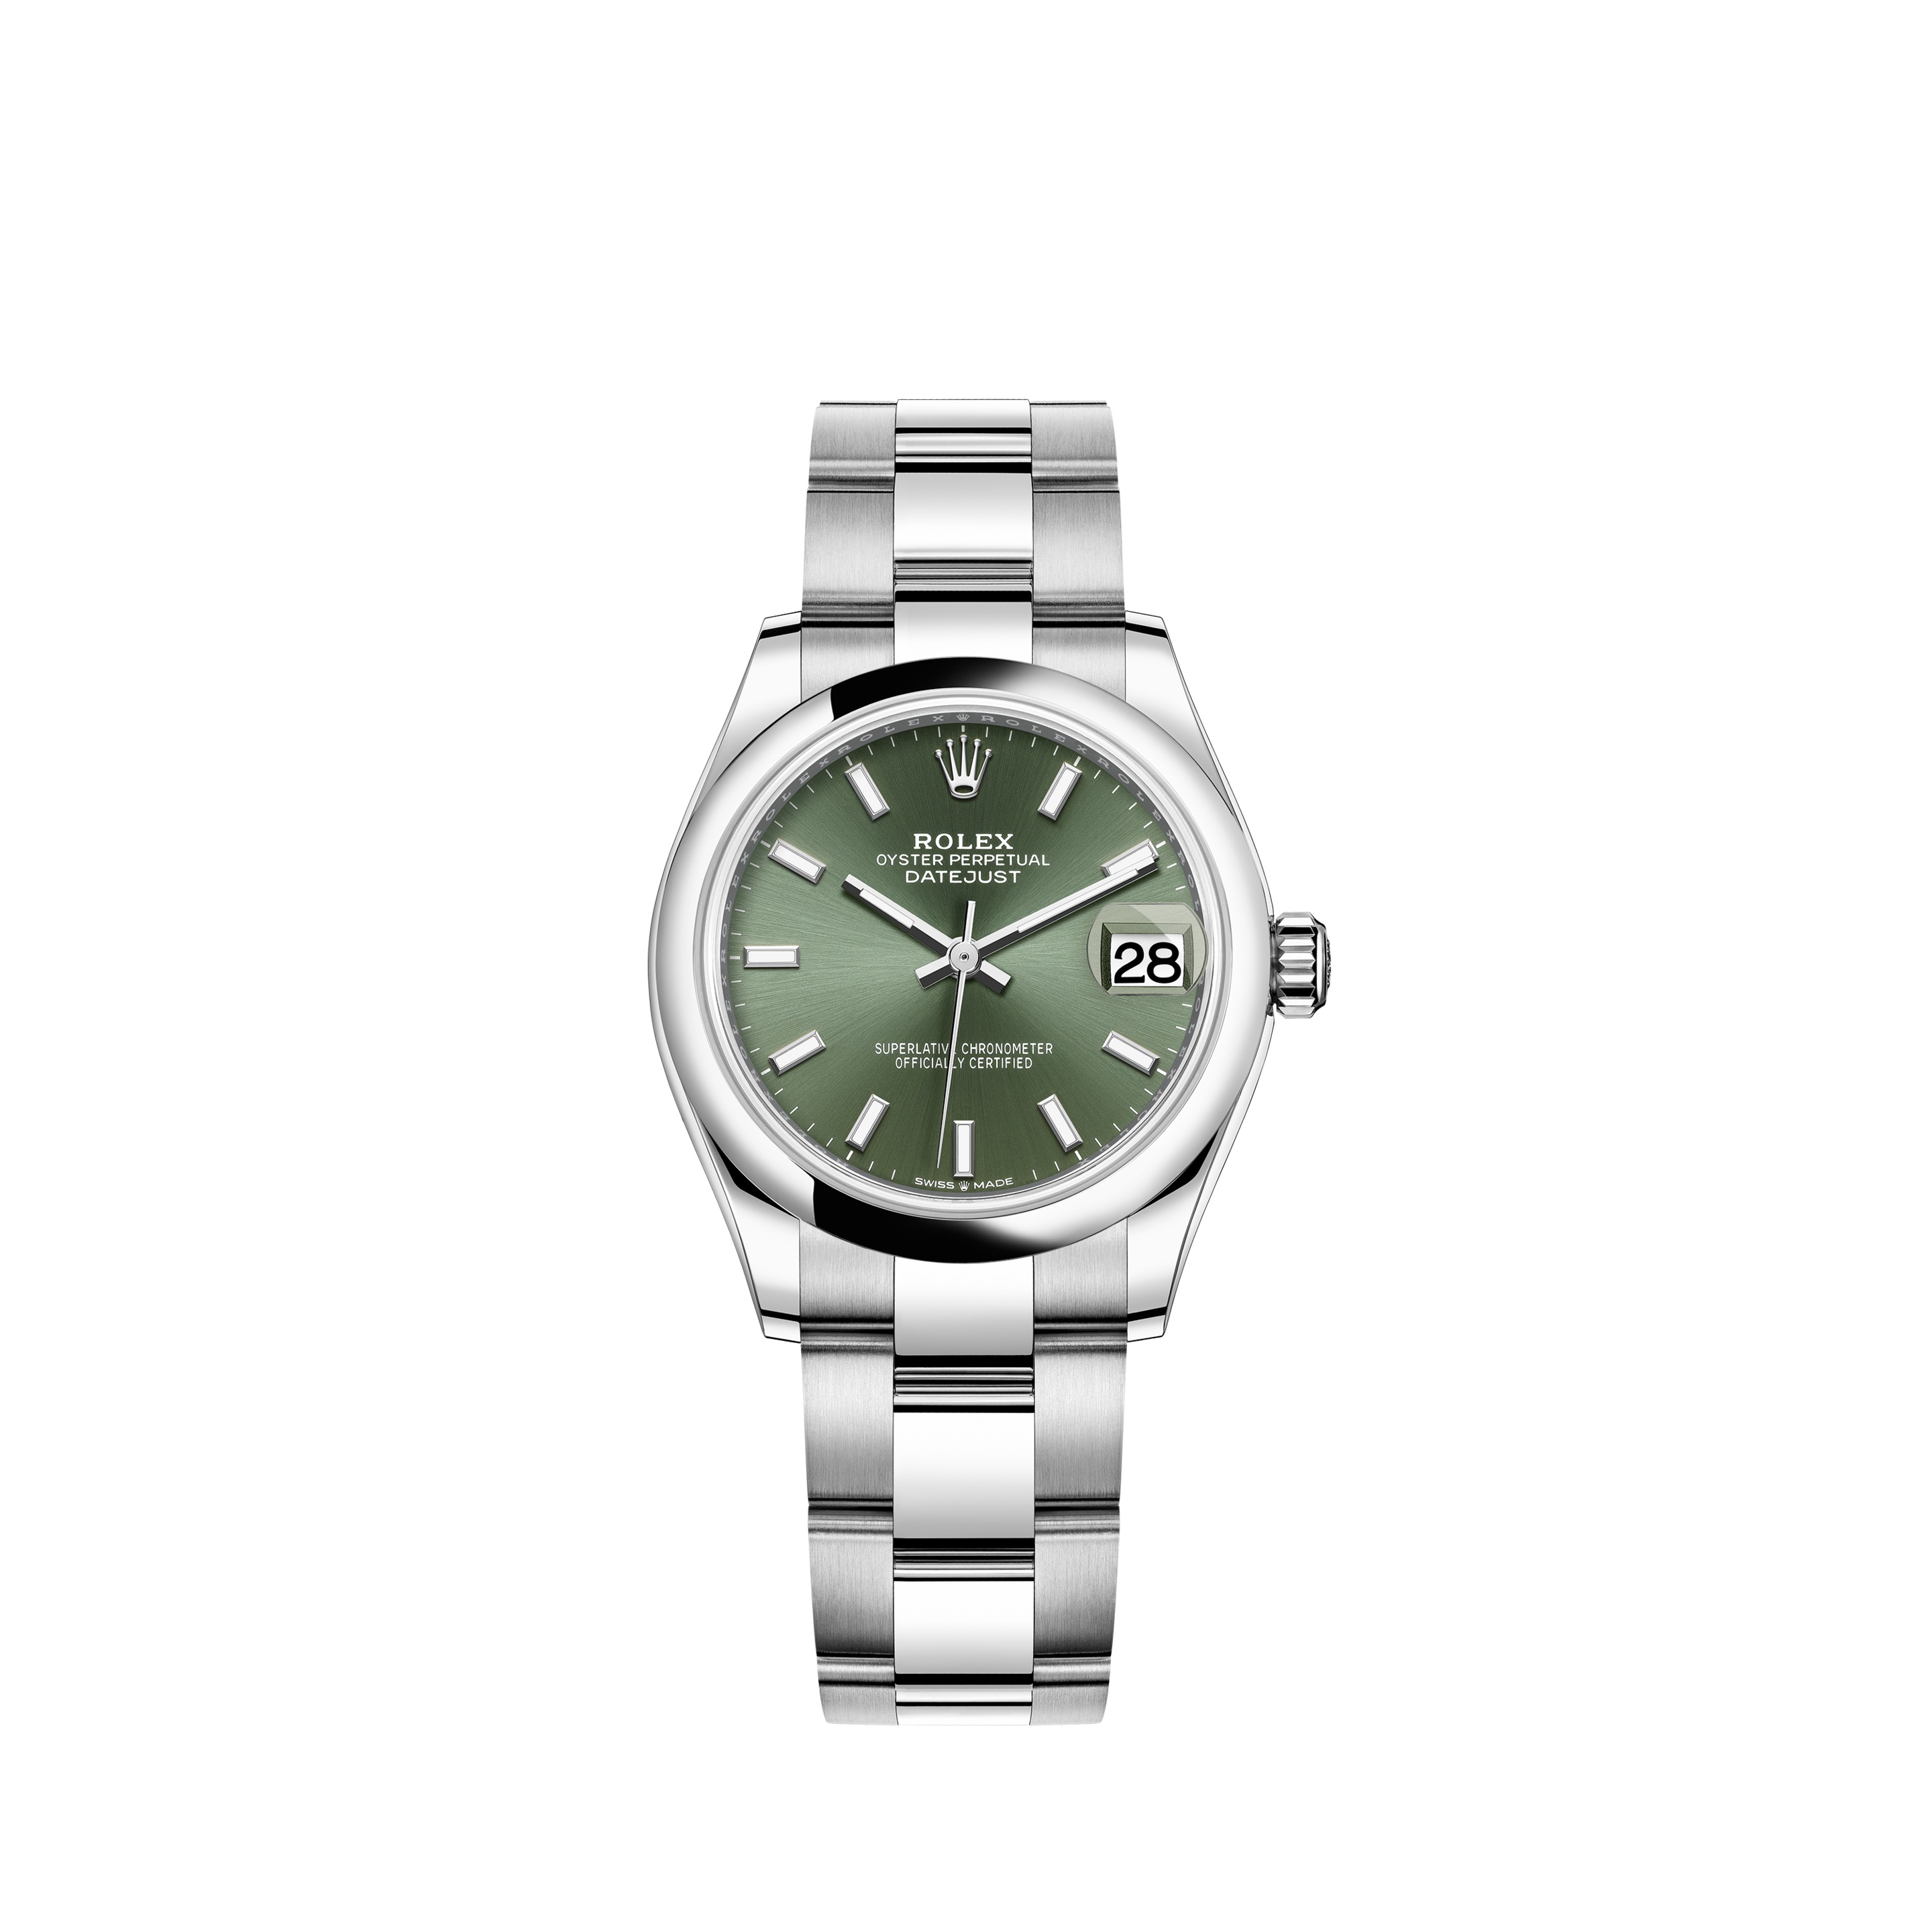 Datejust 31 278240 Stainless Steel Watch (Mint Green)